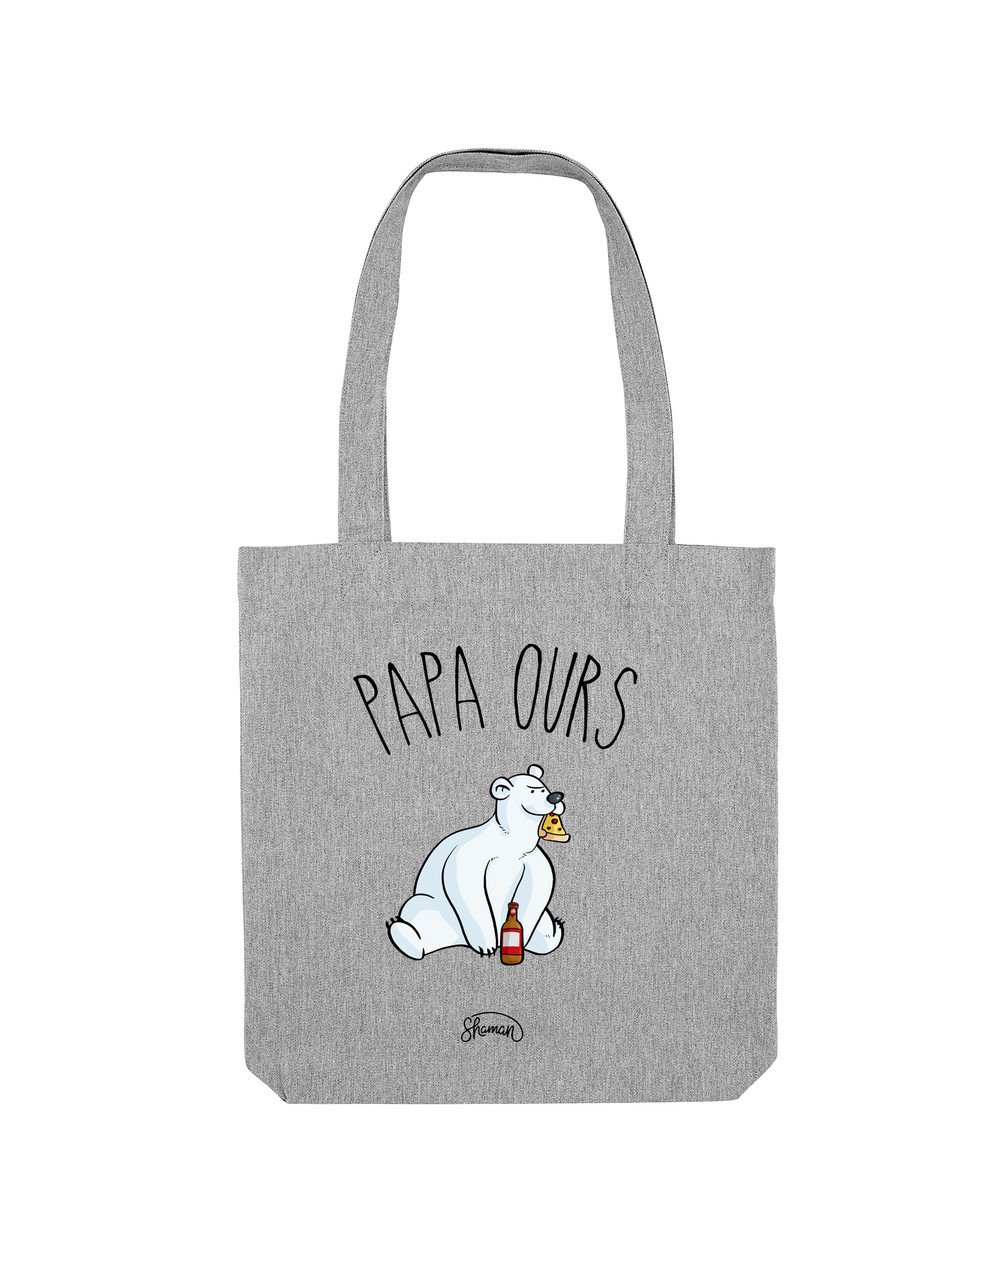 Tote Bag "papa ours"